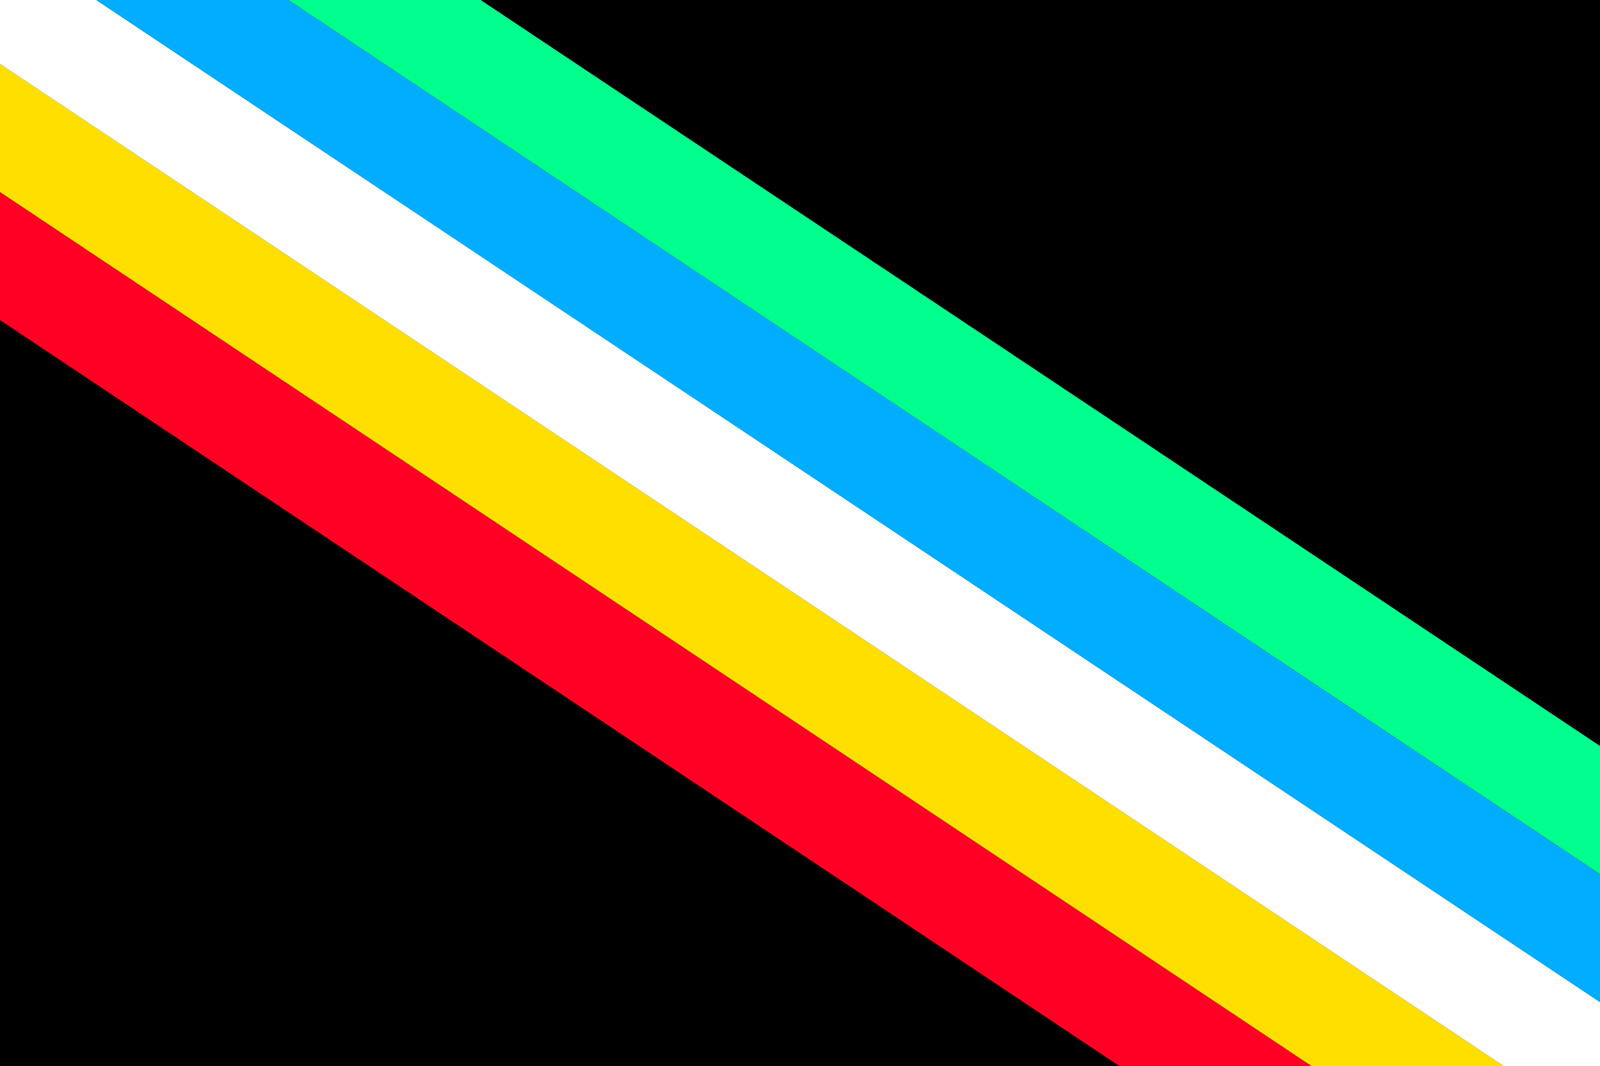 A black field with a diagonal stripe running from the top left to bottom right in green, blue, white, yellow, and red.